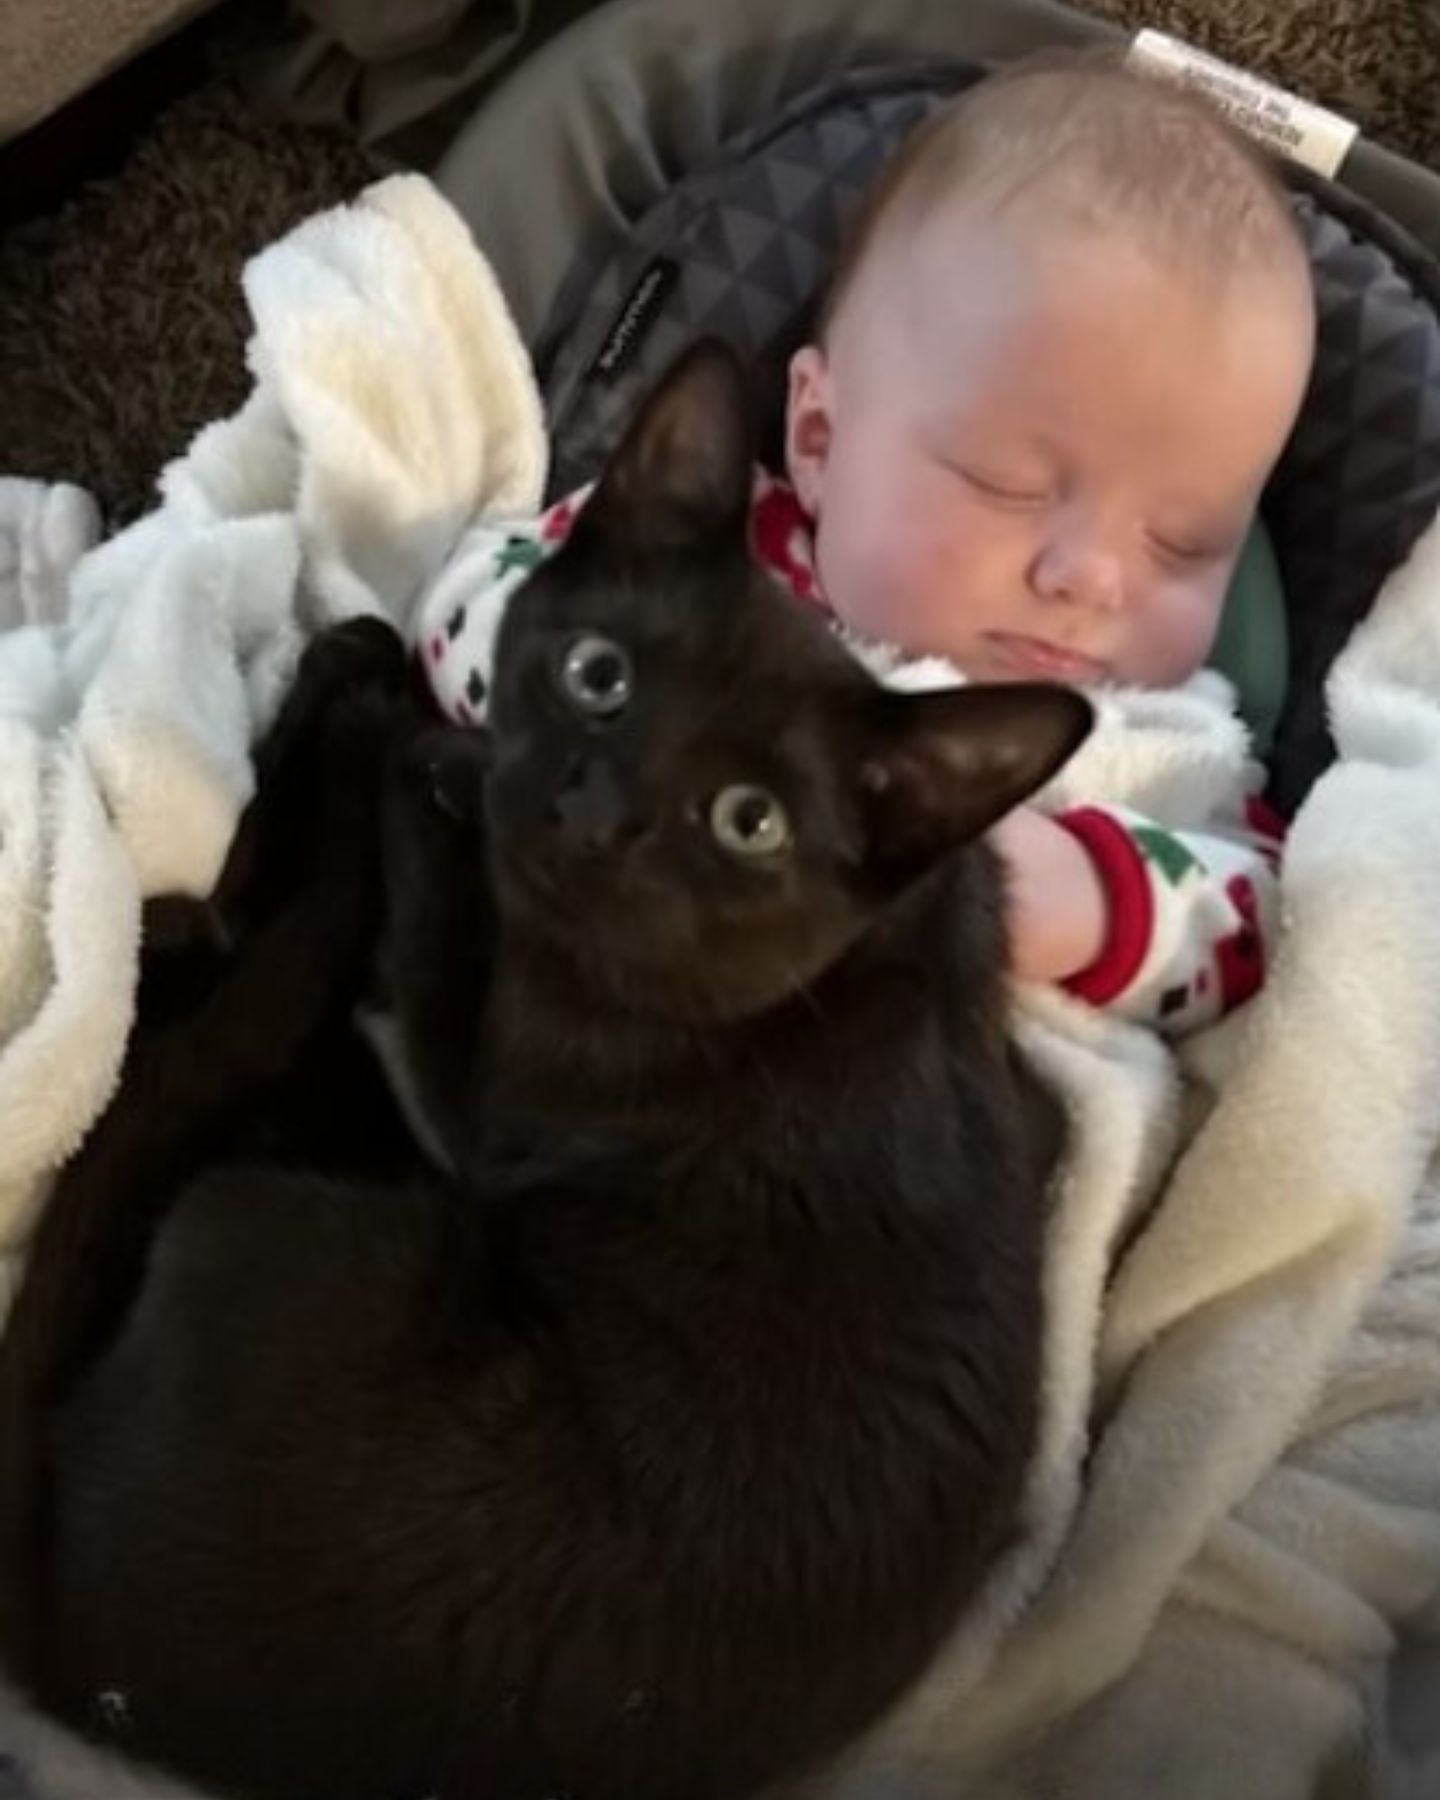 cat lying on a baby